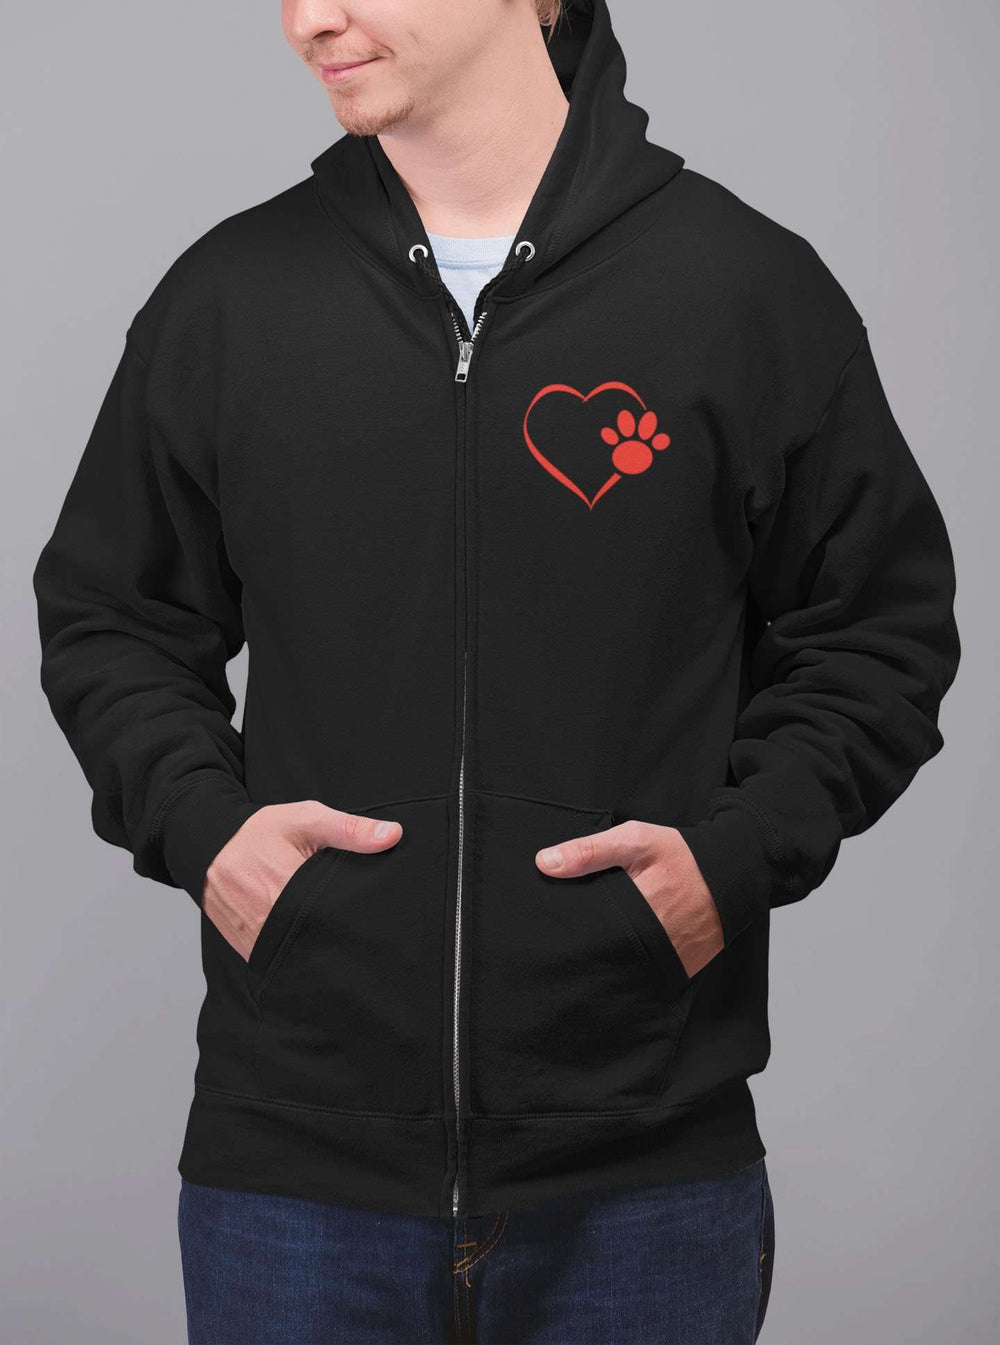 Designs by MyUtopia Shout Out:Heart Dog Paw Embroidered Lightweight Full Zip Hoodie